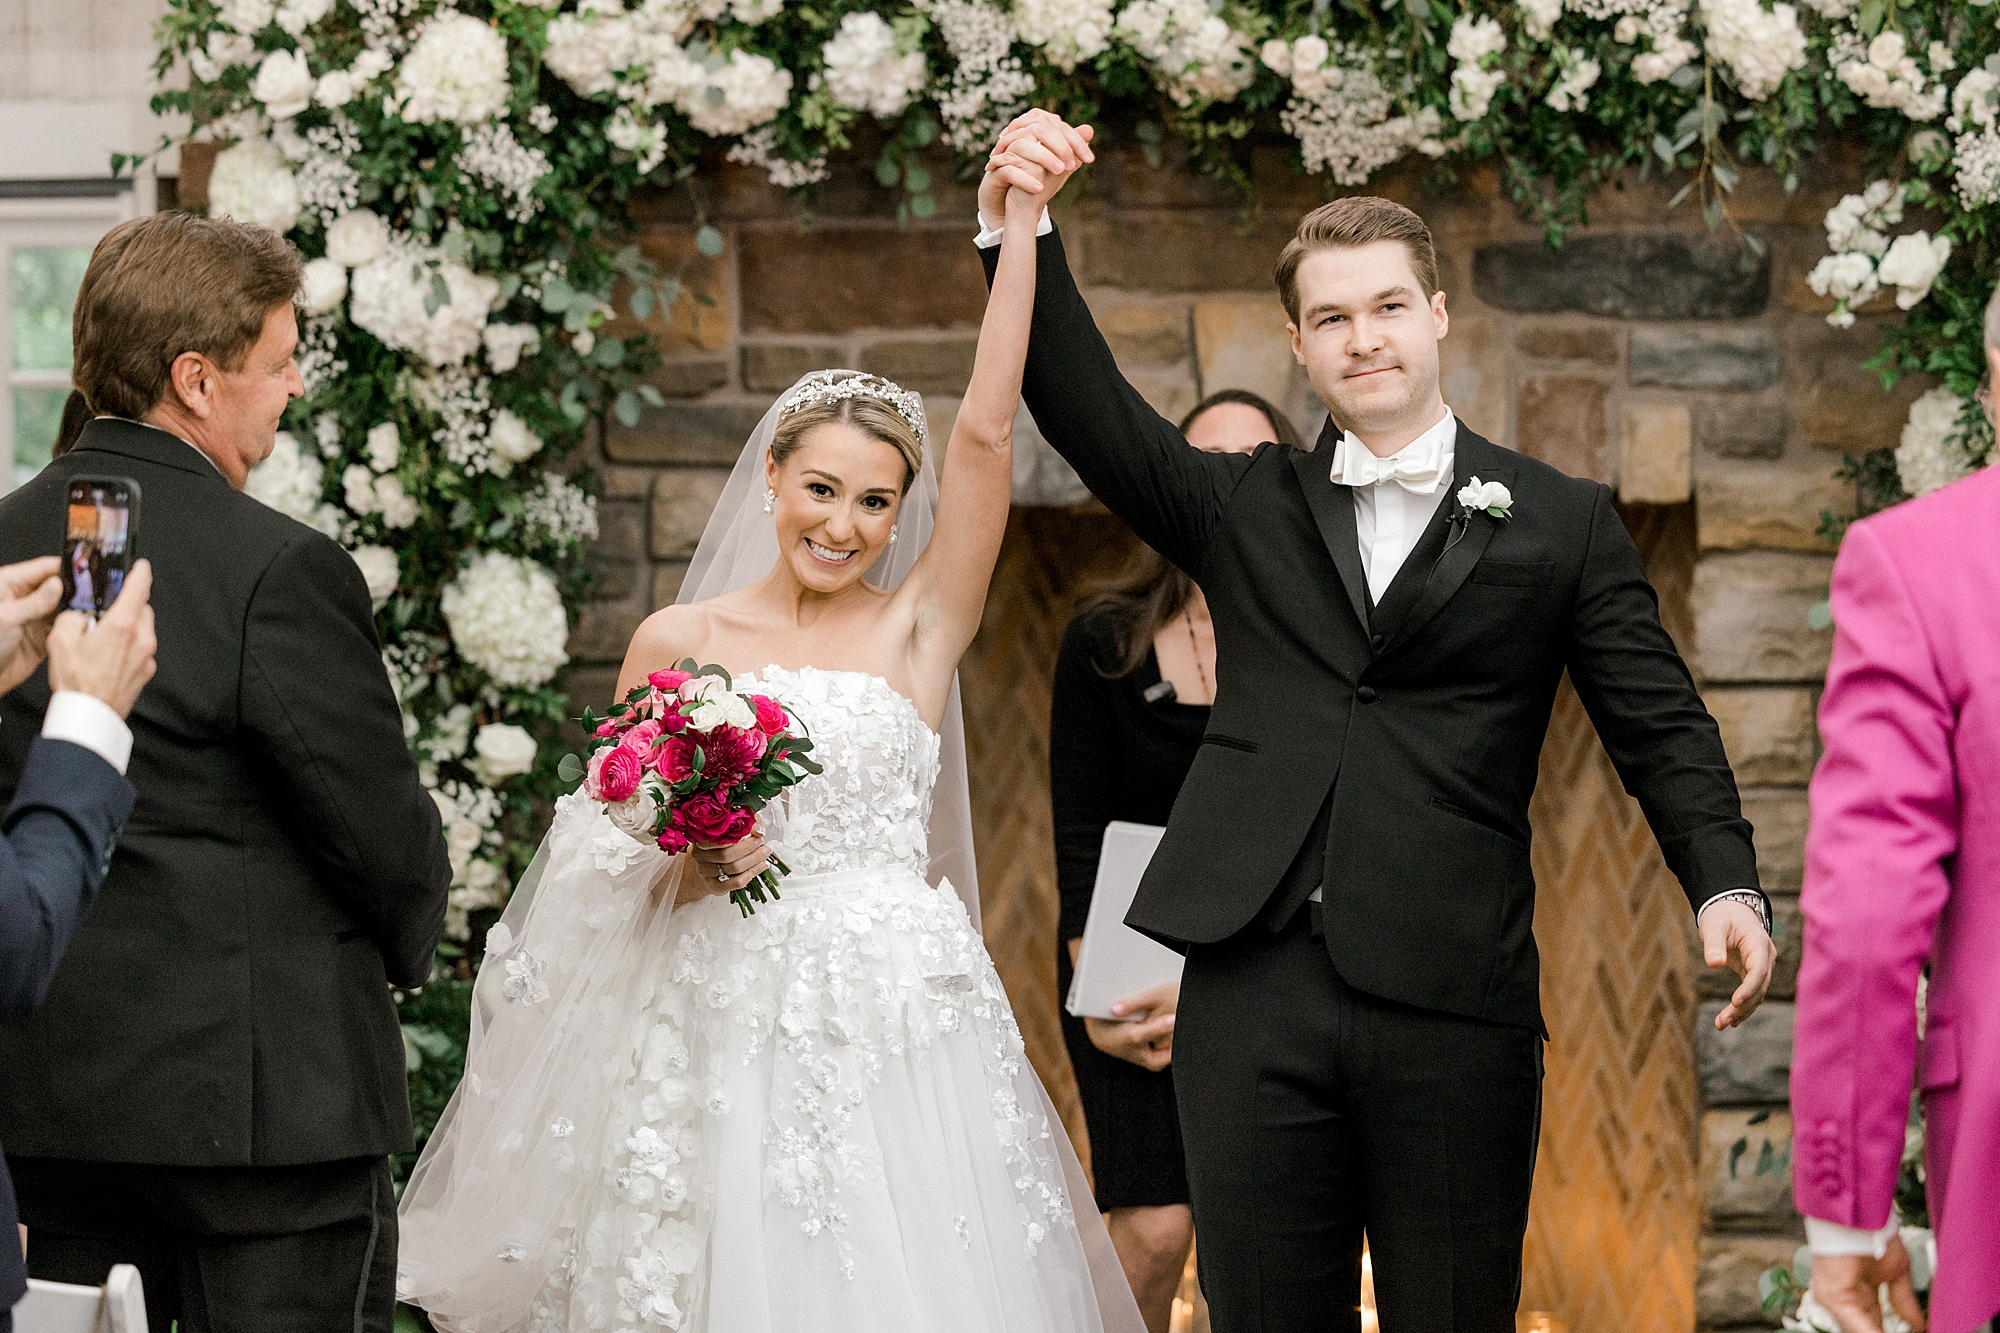 newlyweds cheer holding hands up by fireplace after wedding ceremony